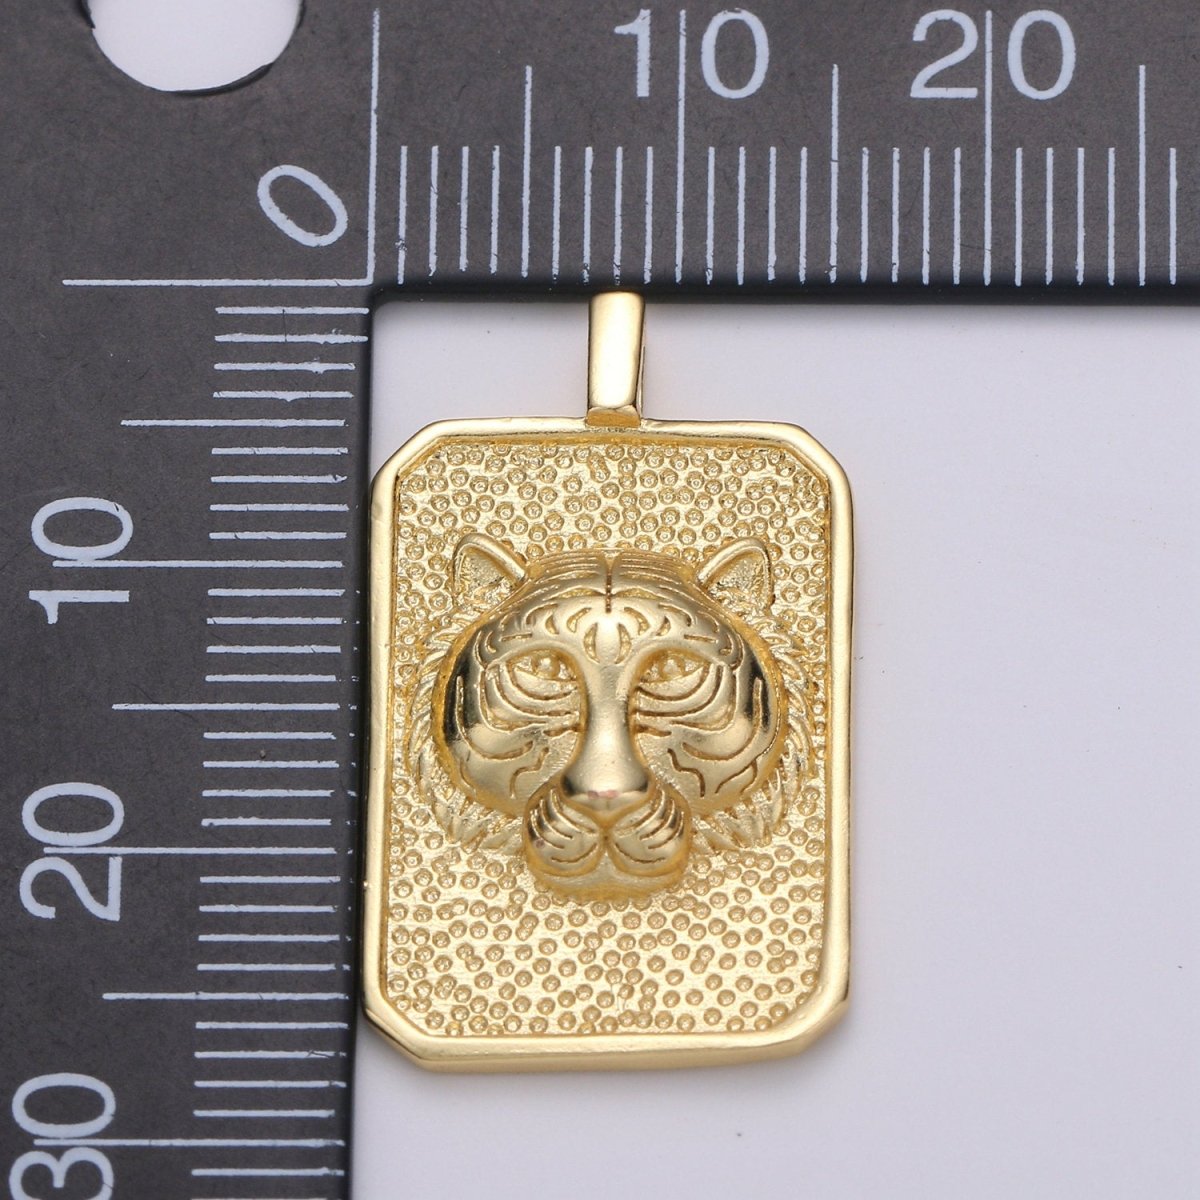 Gold Tag Tiger Charm Gold Filled Medallion, Tiger King Pendant Animal Necklace Charm for Statement Necklace Component Men Unisex Jewelry J-024 - DLUXCA